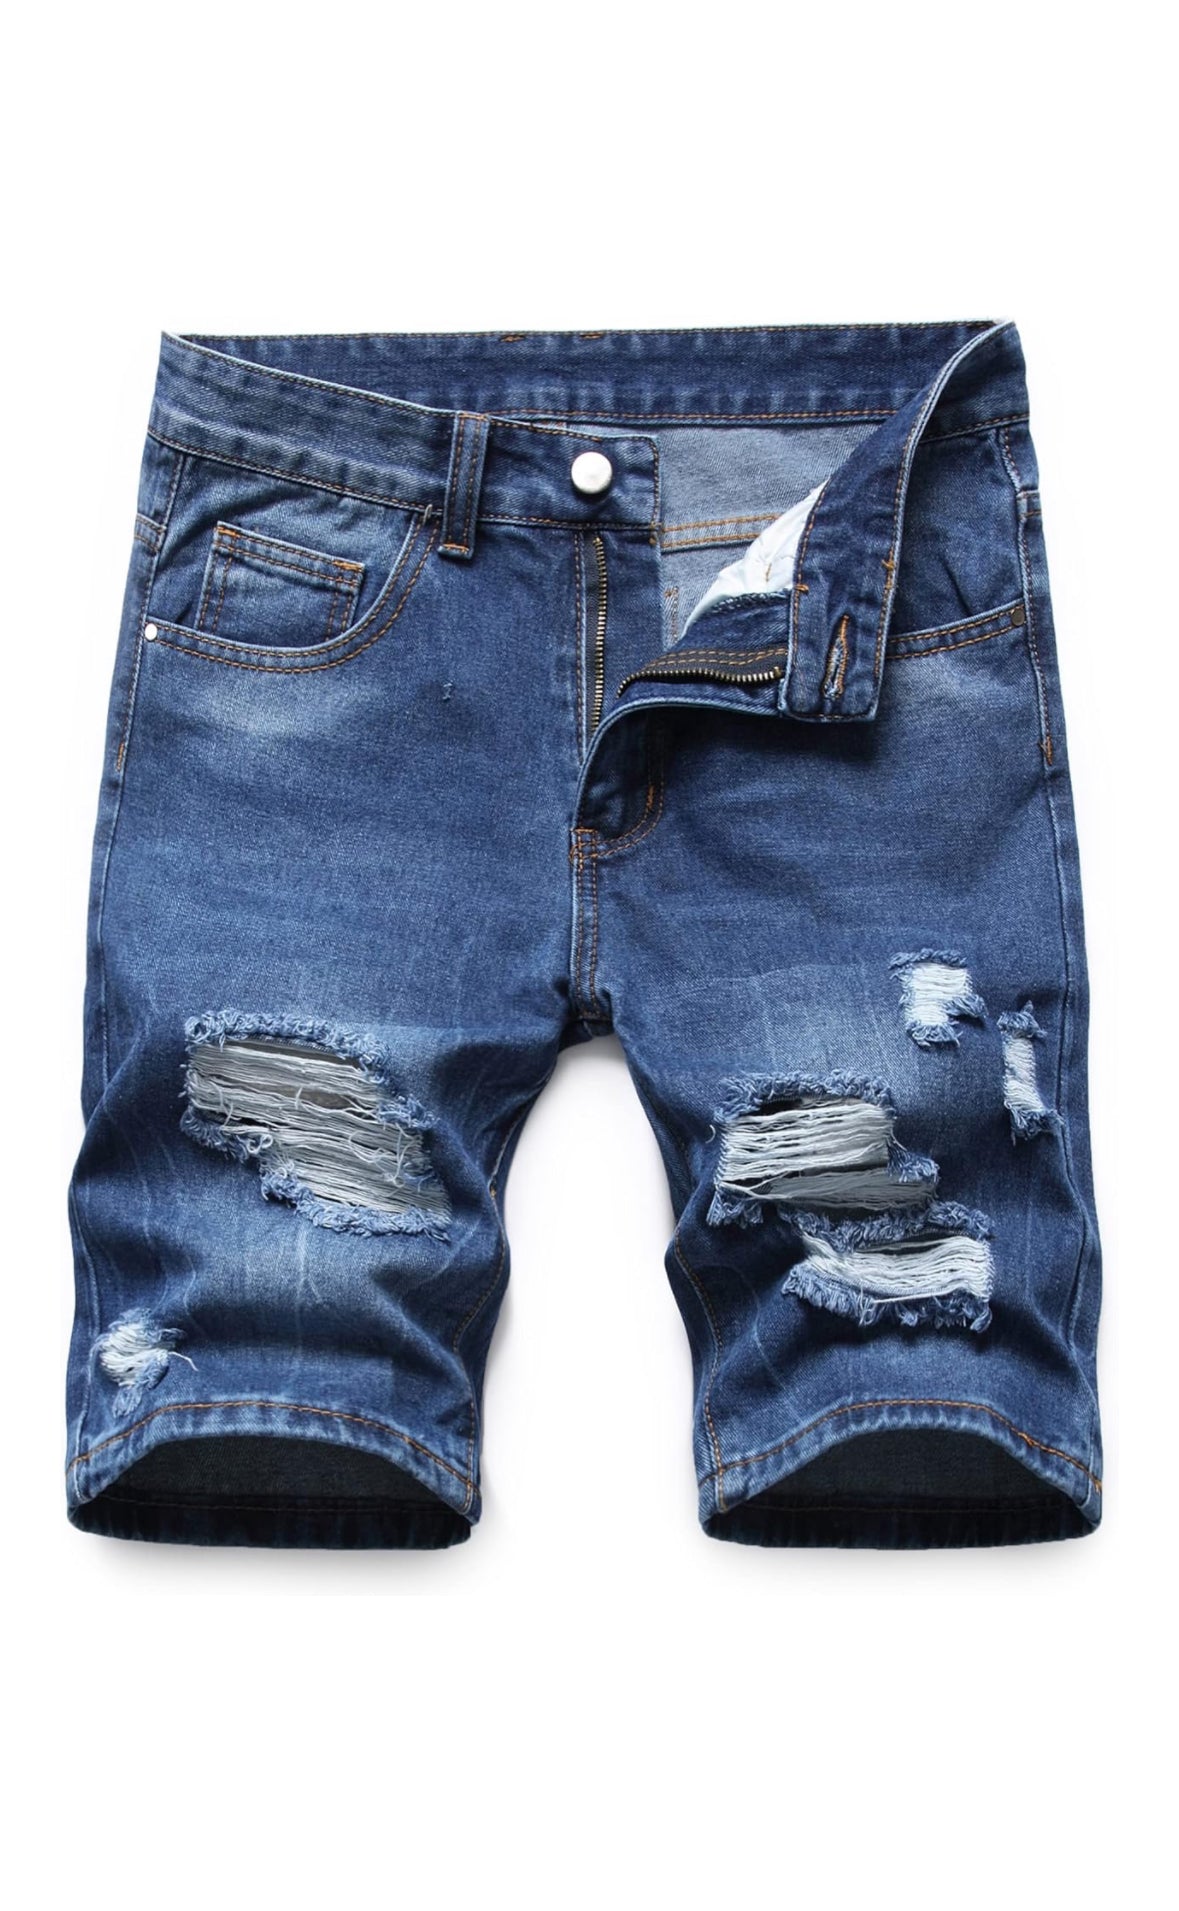 Men’s jean shorts by the 2fifty2 brand